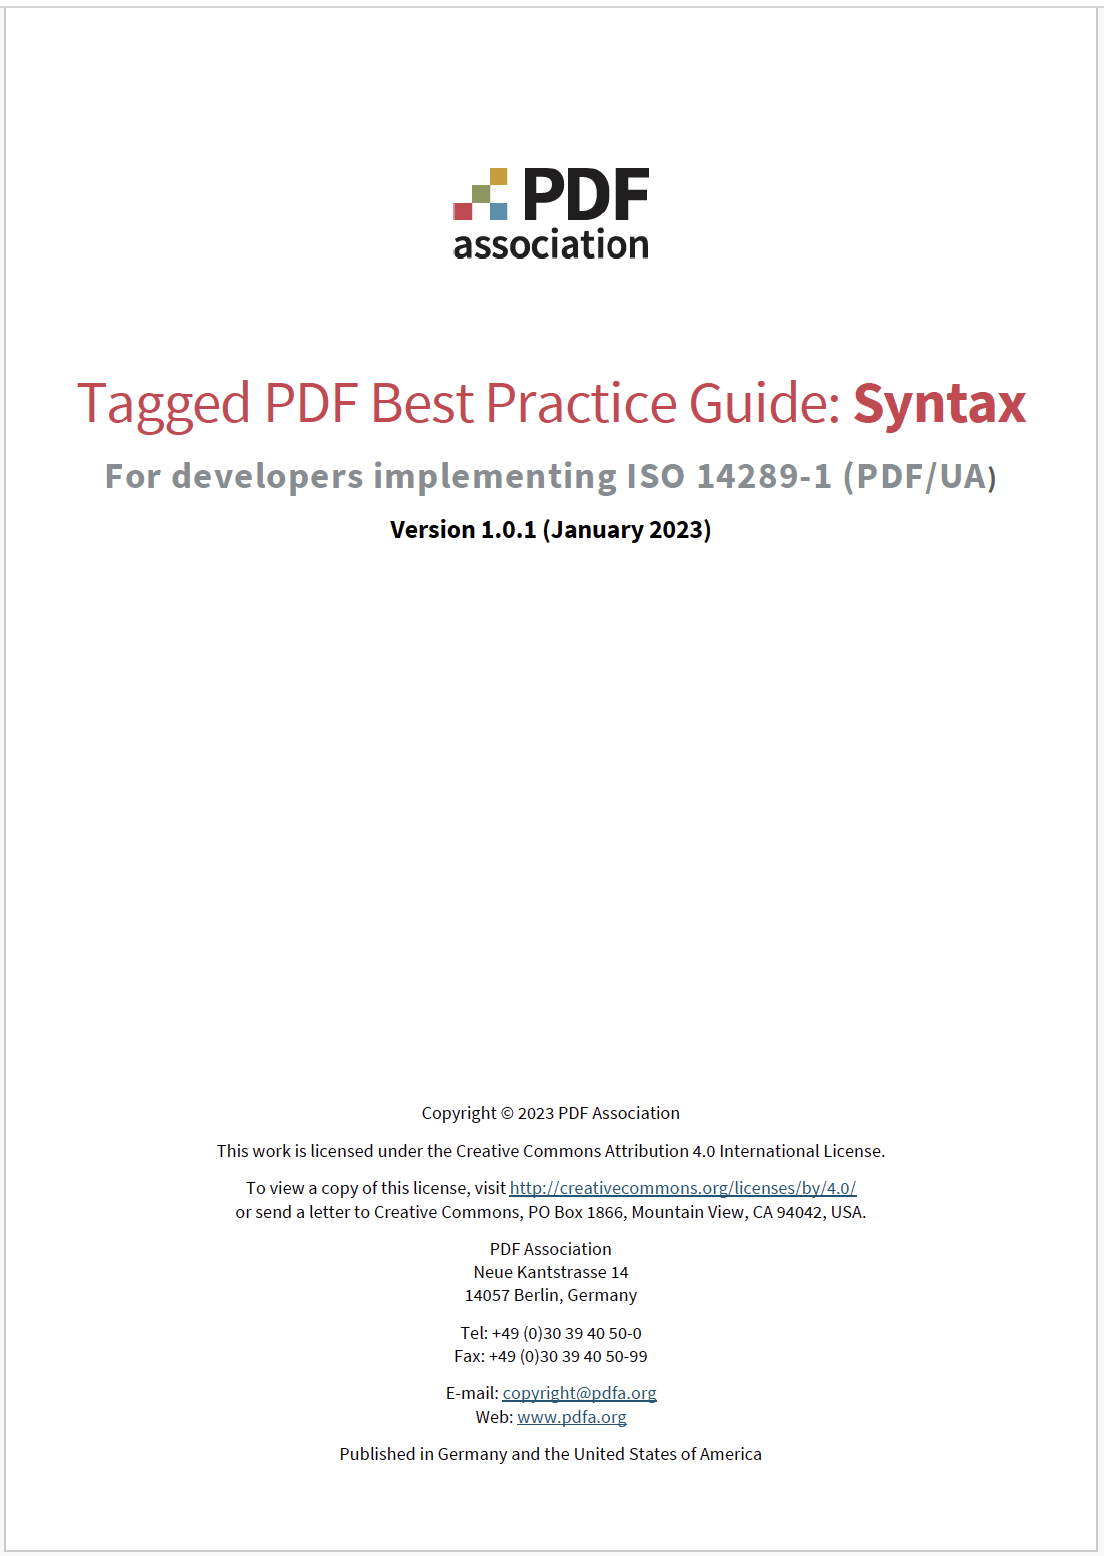 PDF Association - Tagged PDF Best Practices Guide V1.0.1, Front Cover - Picture